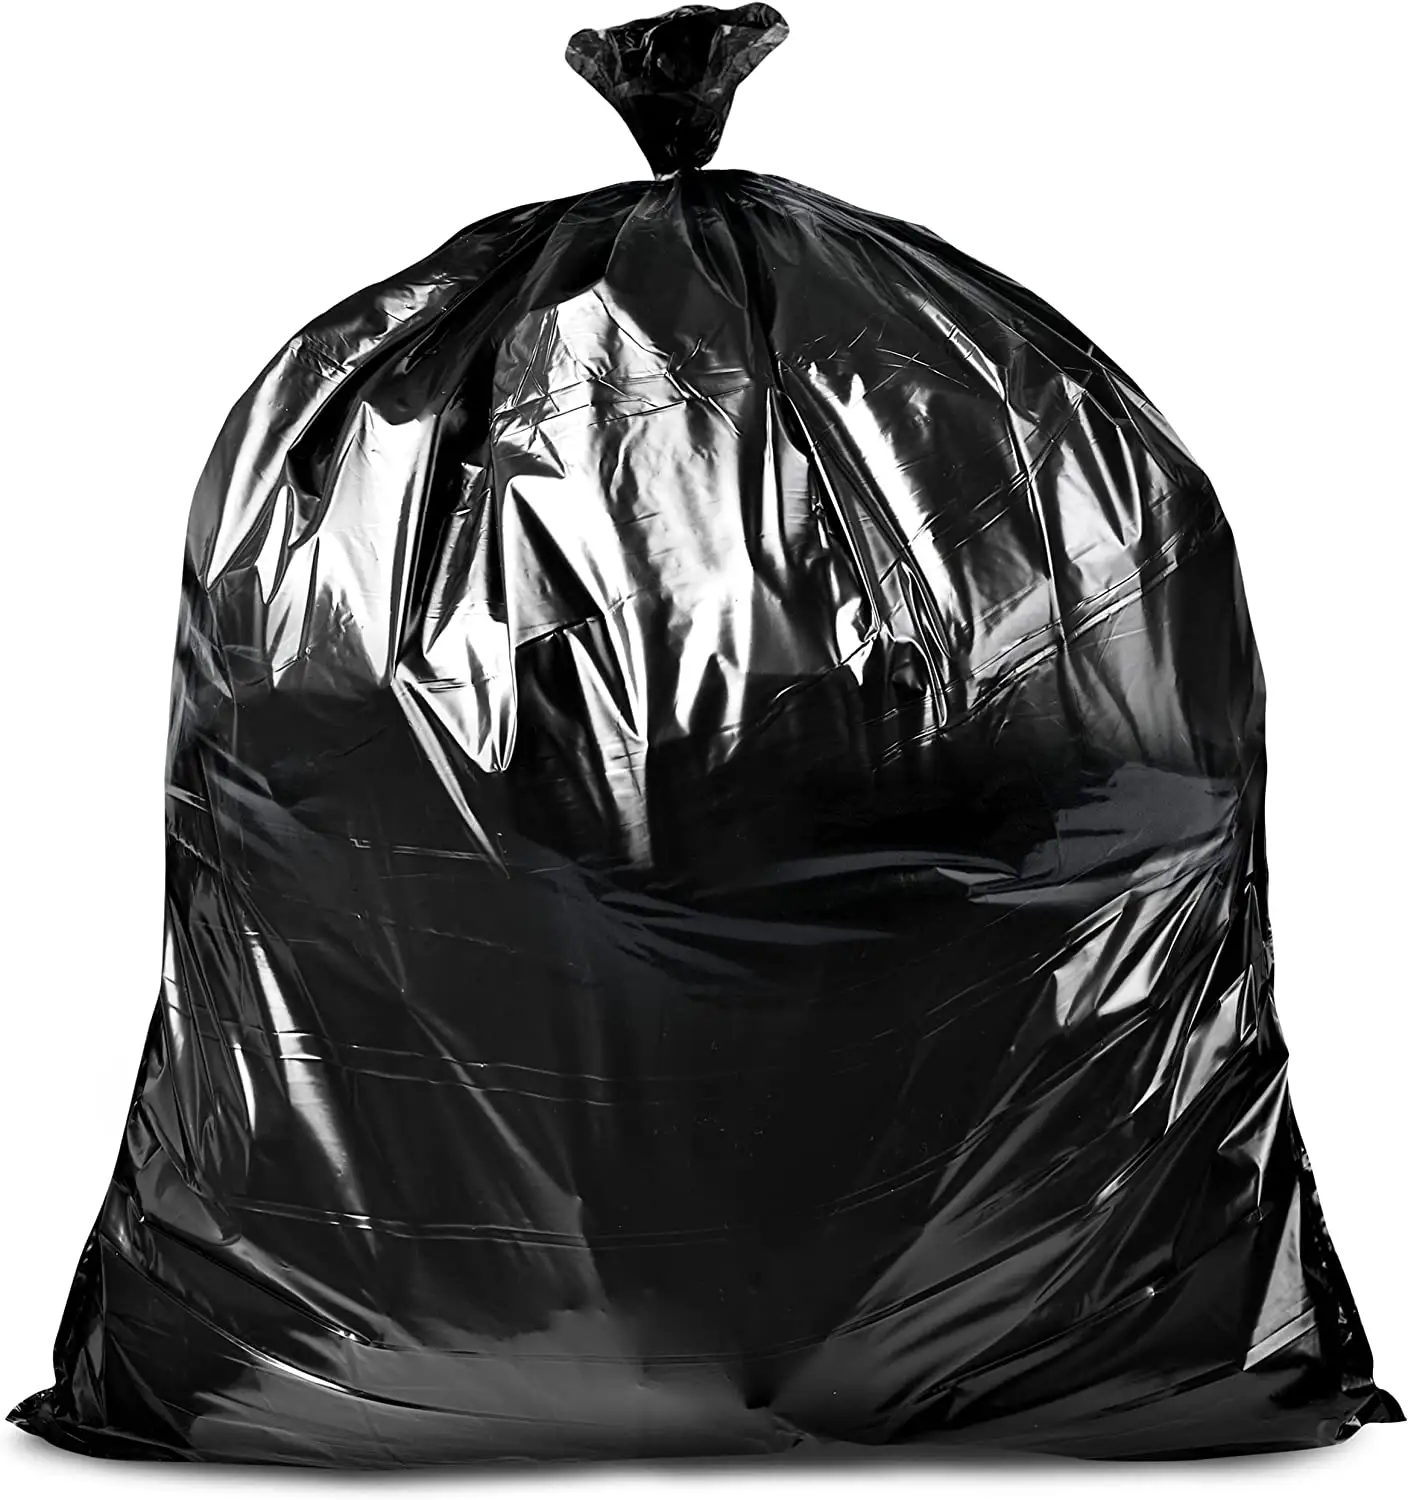 55-60 Gallon Contractor Trash Bags 3.0 Mil Large Black Heavy Duty Garbage Bags